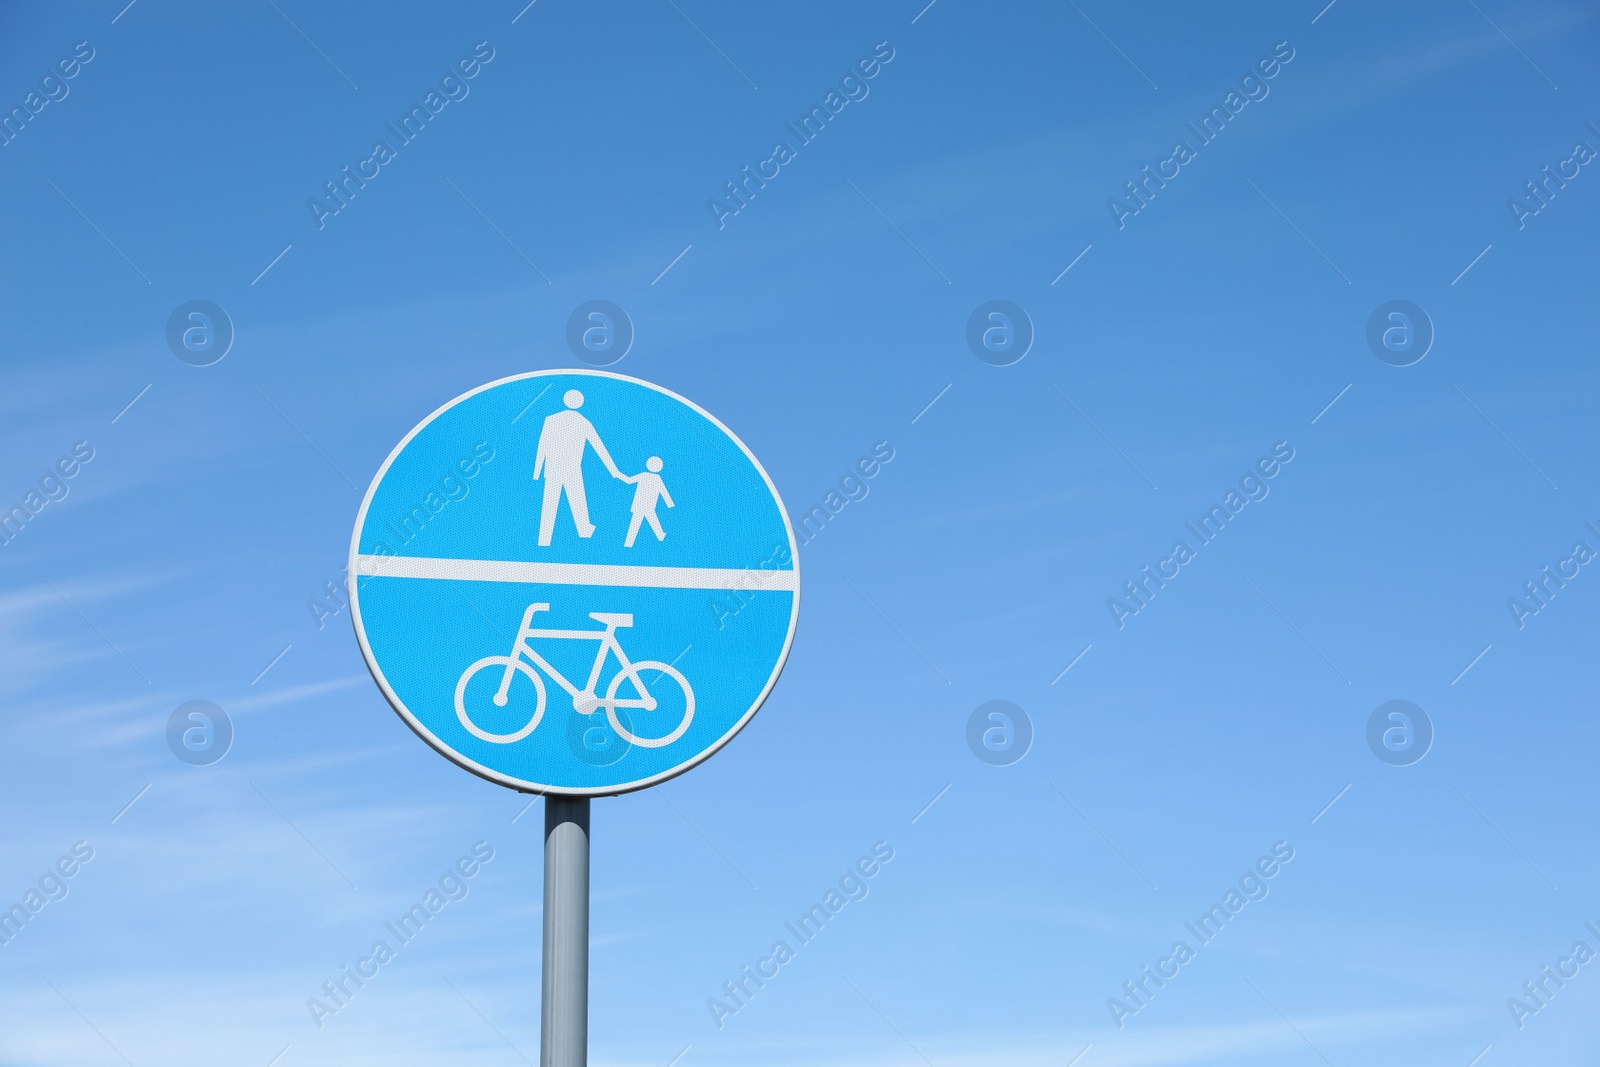 Photo of Traffic sign Compulsory Track For Pedestrians and Bicycles against blue sky